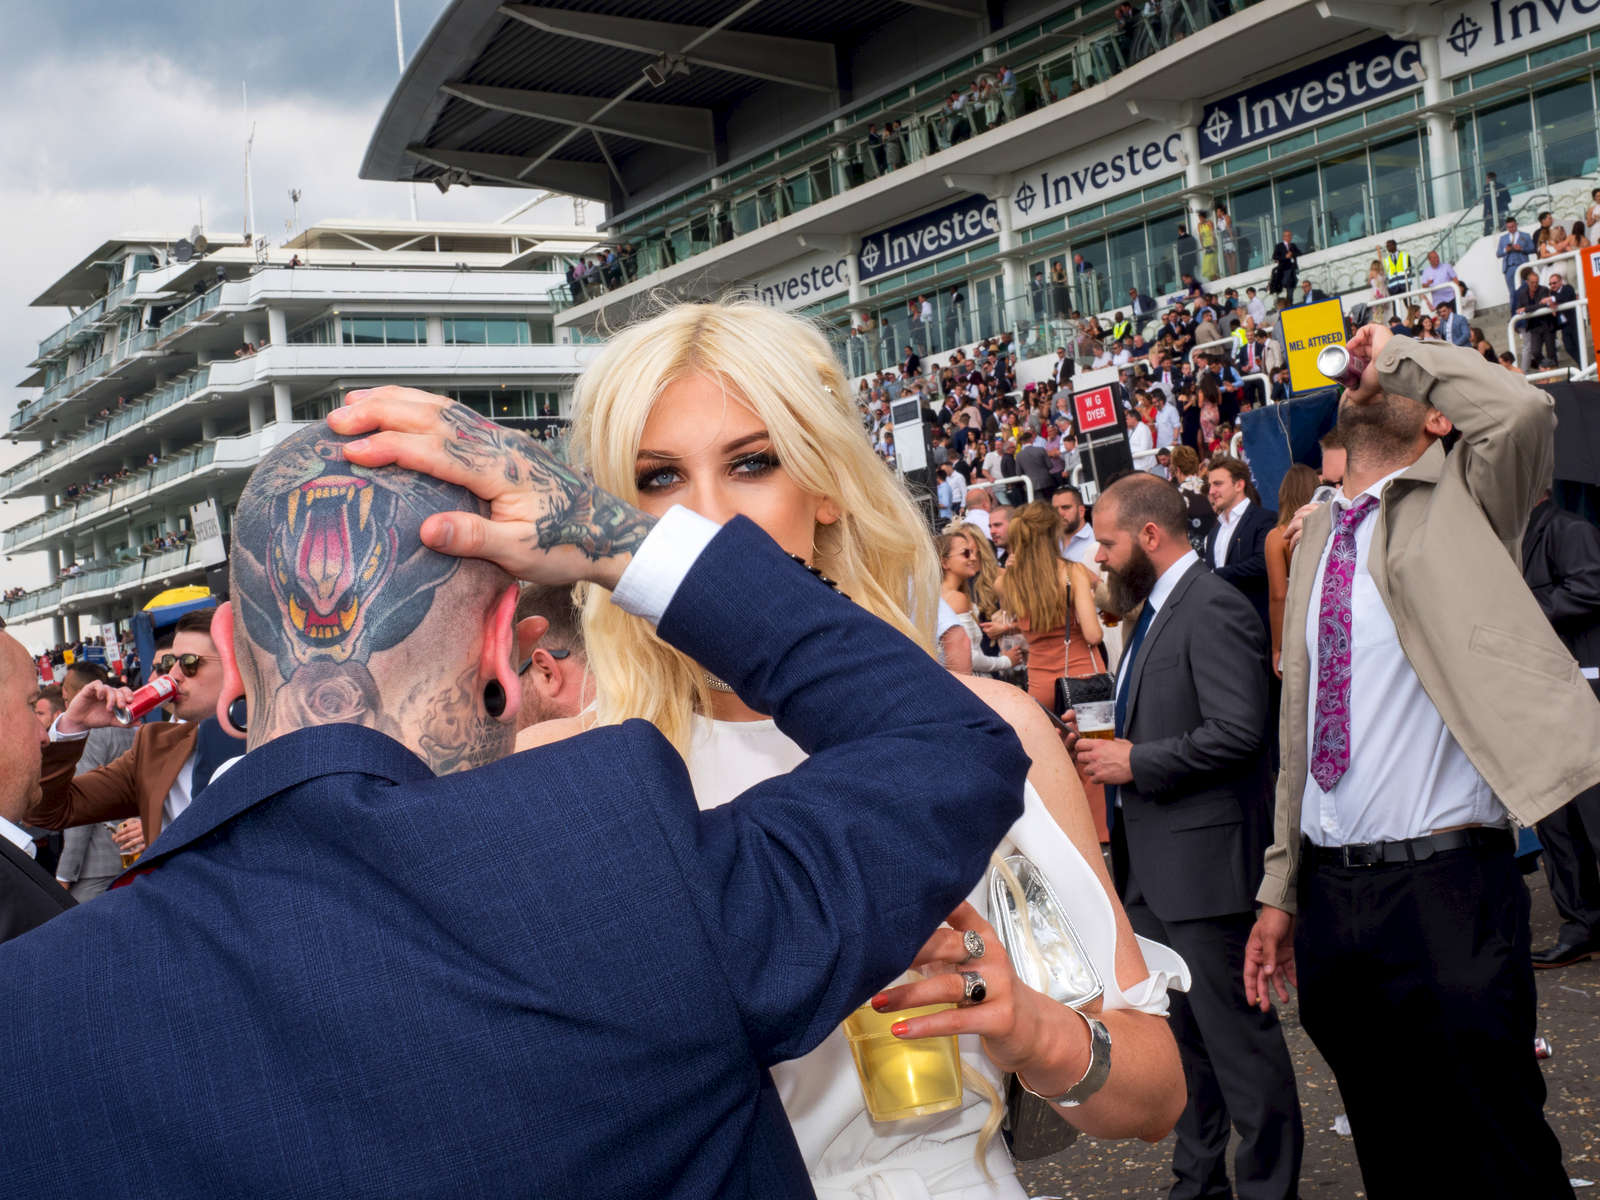 Jethro and Kitty from Stratford on Ladies' Day at Epsom.Ladies' Day is traditionally held on the first Friday of June, a multitude of ladies and gents head to Epsom Downs Racecourse to experience a day full of high octane racing, music, glamour and fashion.